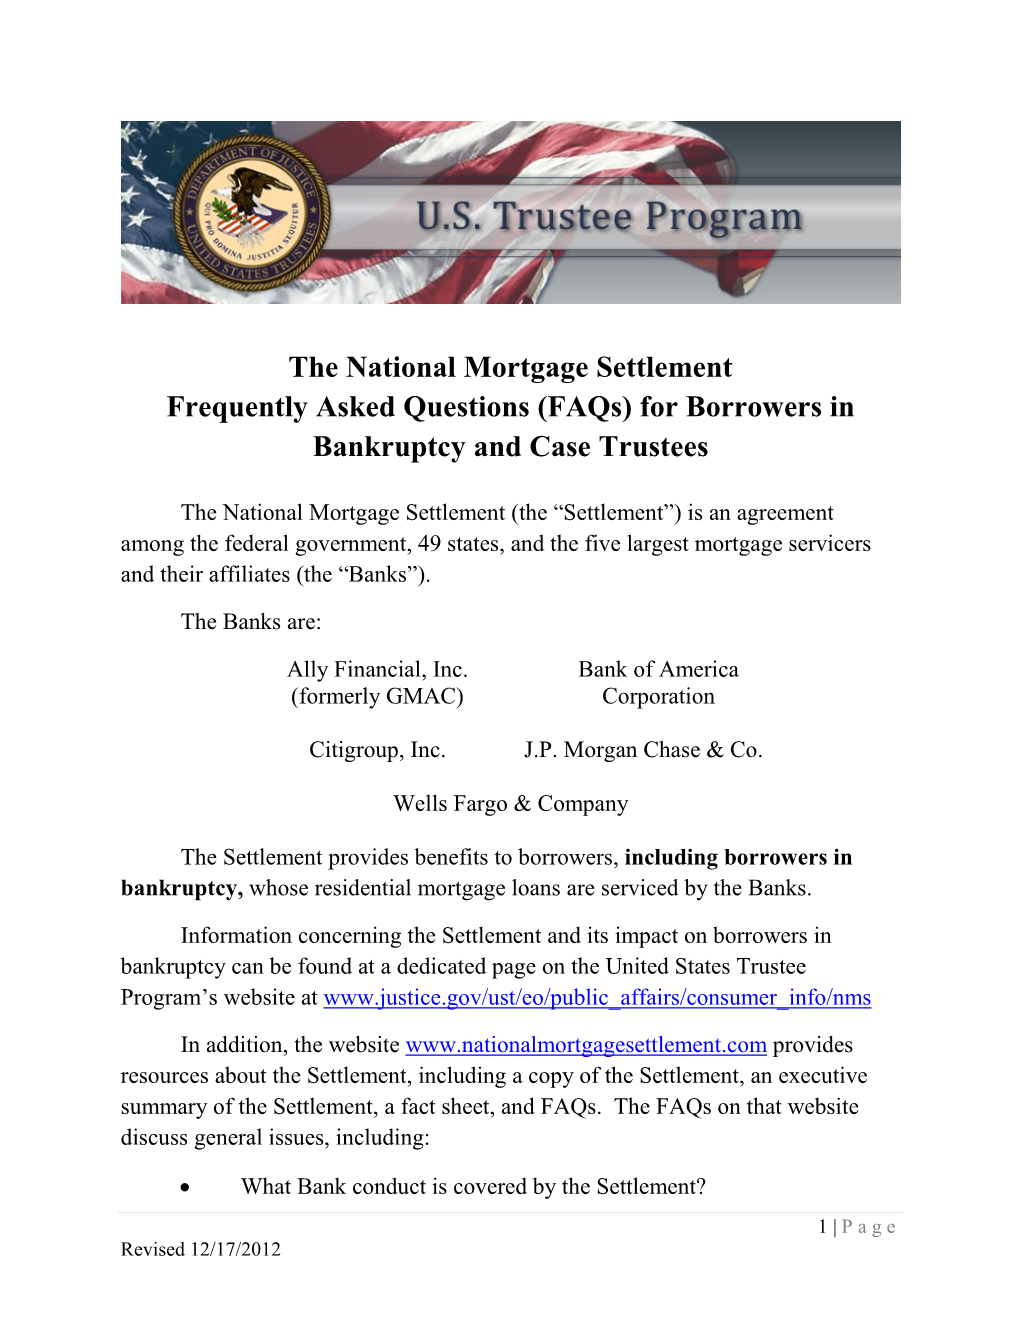 The National Mortgage Settlement Frequently Asked Questions (Faqs) for Borrowers in Bankruptcy and Case Trustees